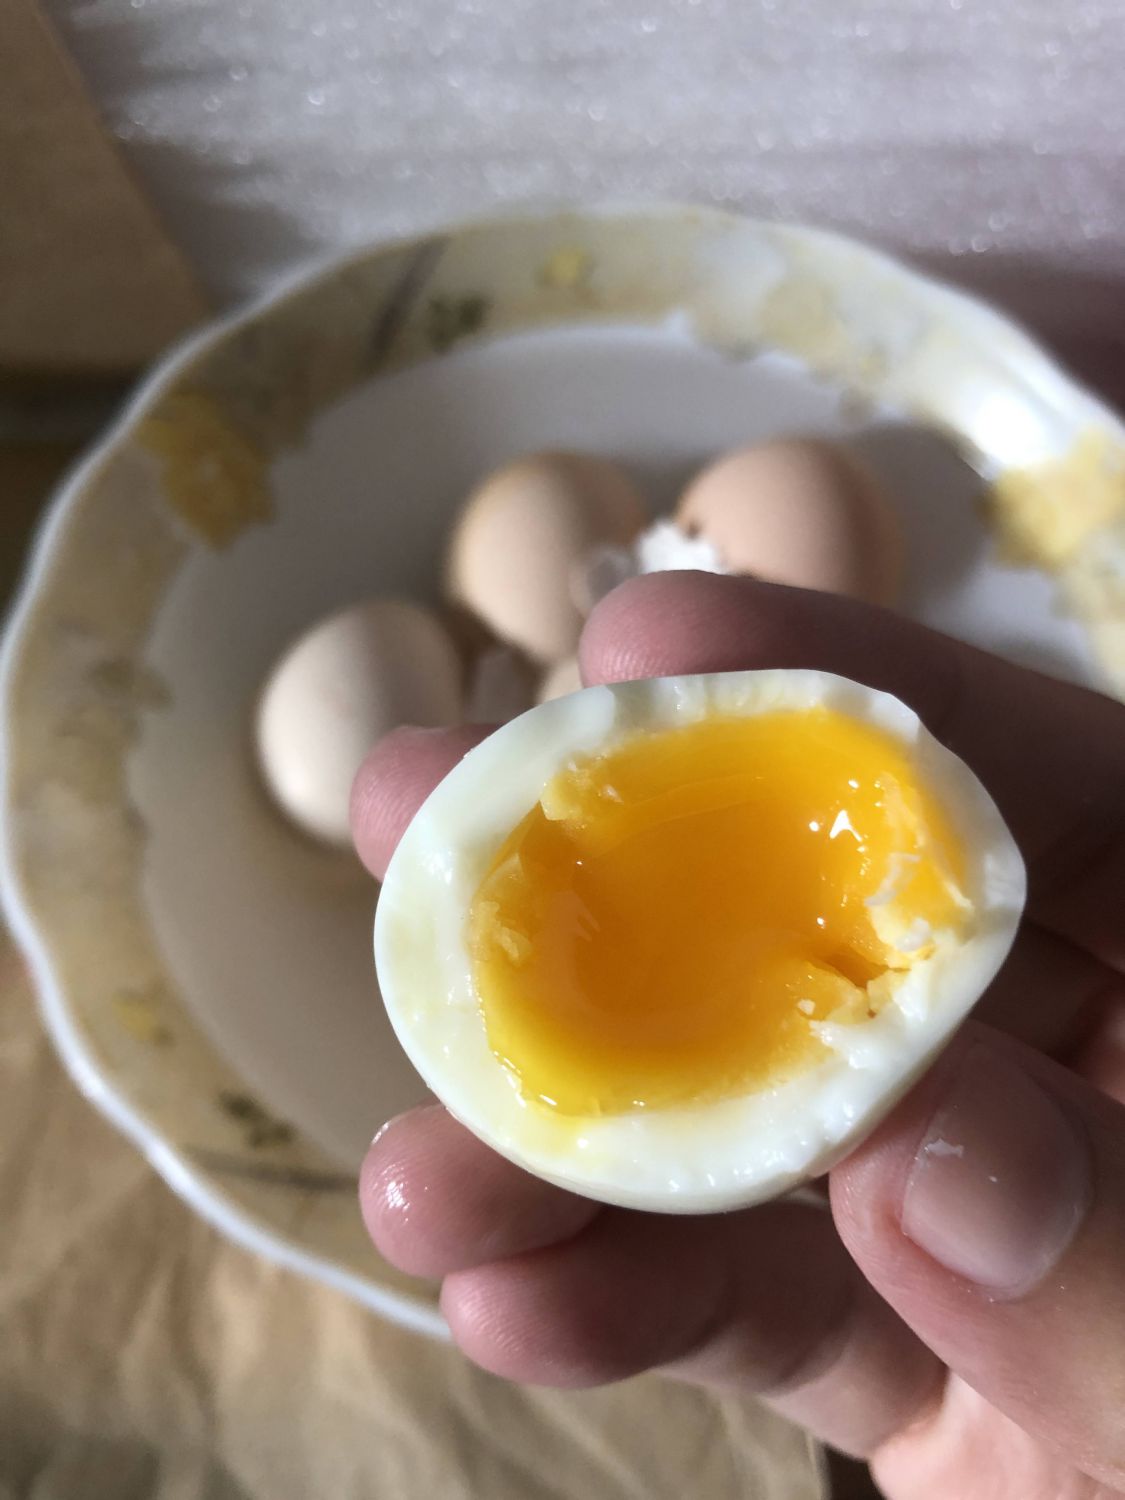 Benefit of eating silkie chicken egg